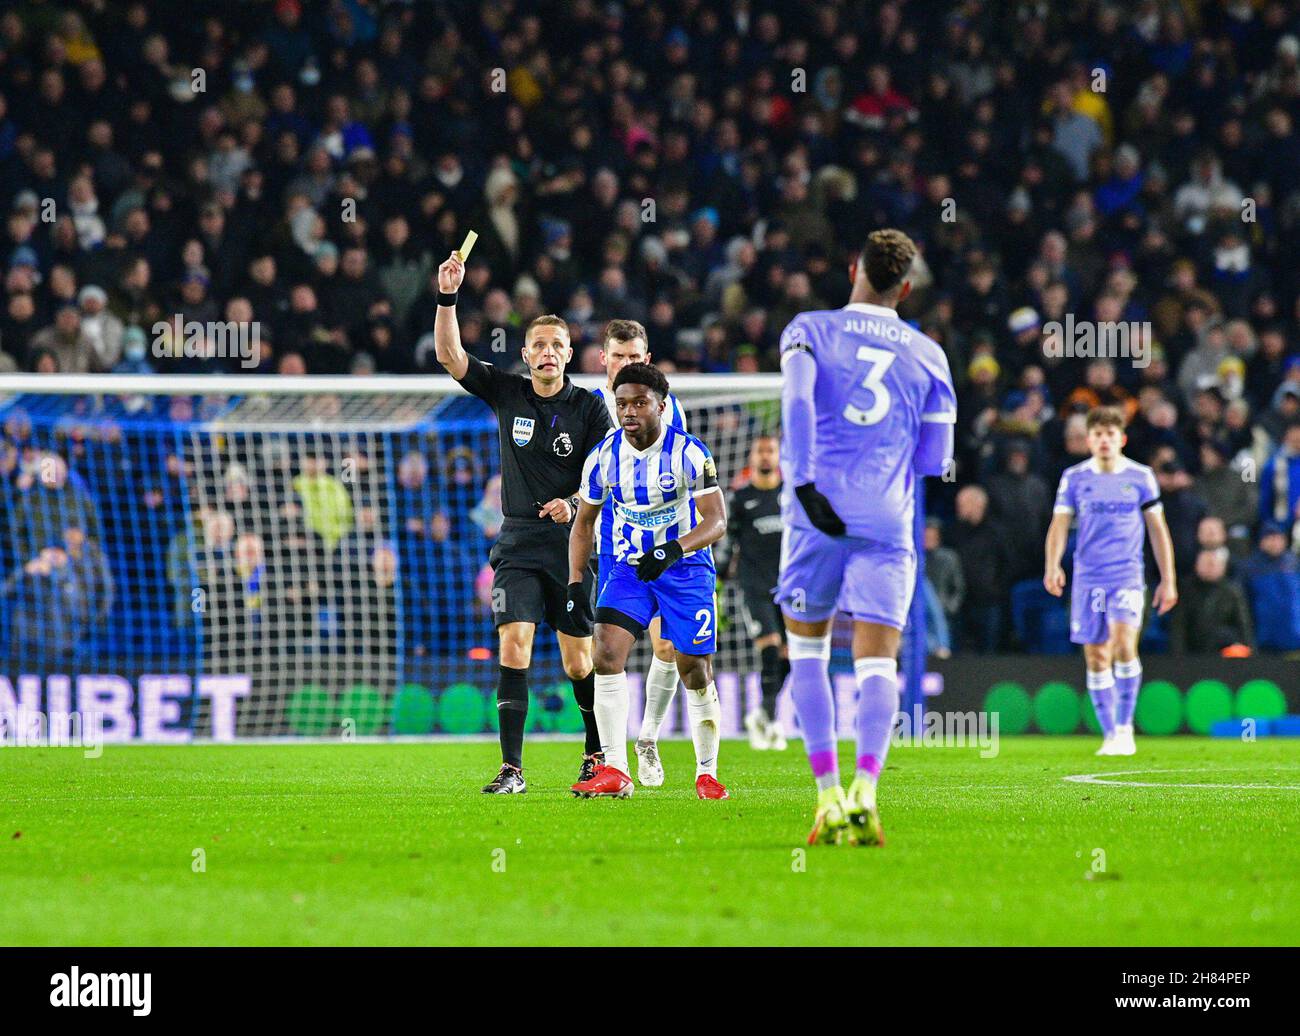 Brighton, UK. 27th Nov, 2021. Junior Firpo of Leeds United is shown a yellow card for his fould on Tariq Lamptey of Brighton and Hove Albion during the Premier League match between Brighton & Hove Albion and Leeds United at The Amex on November 27th 2021 in Brighton, England. (Photo by Jeff Mood/phcimages.com) Credit: PHC Images/Alamy Live News Stock Photo